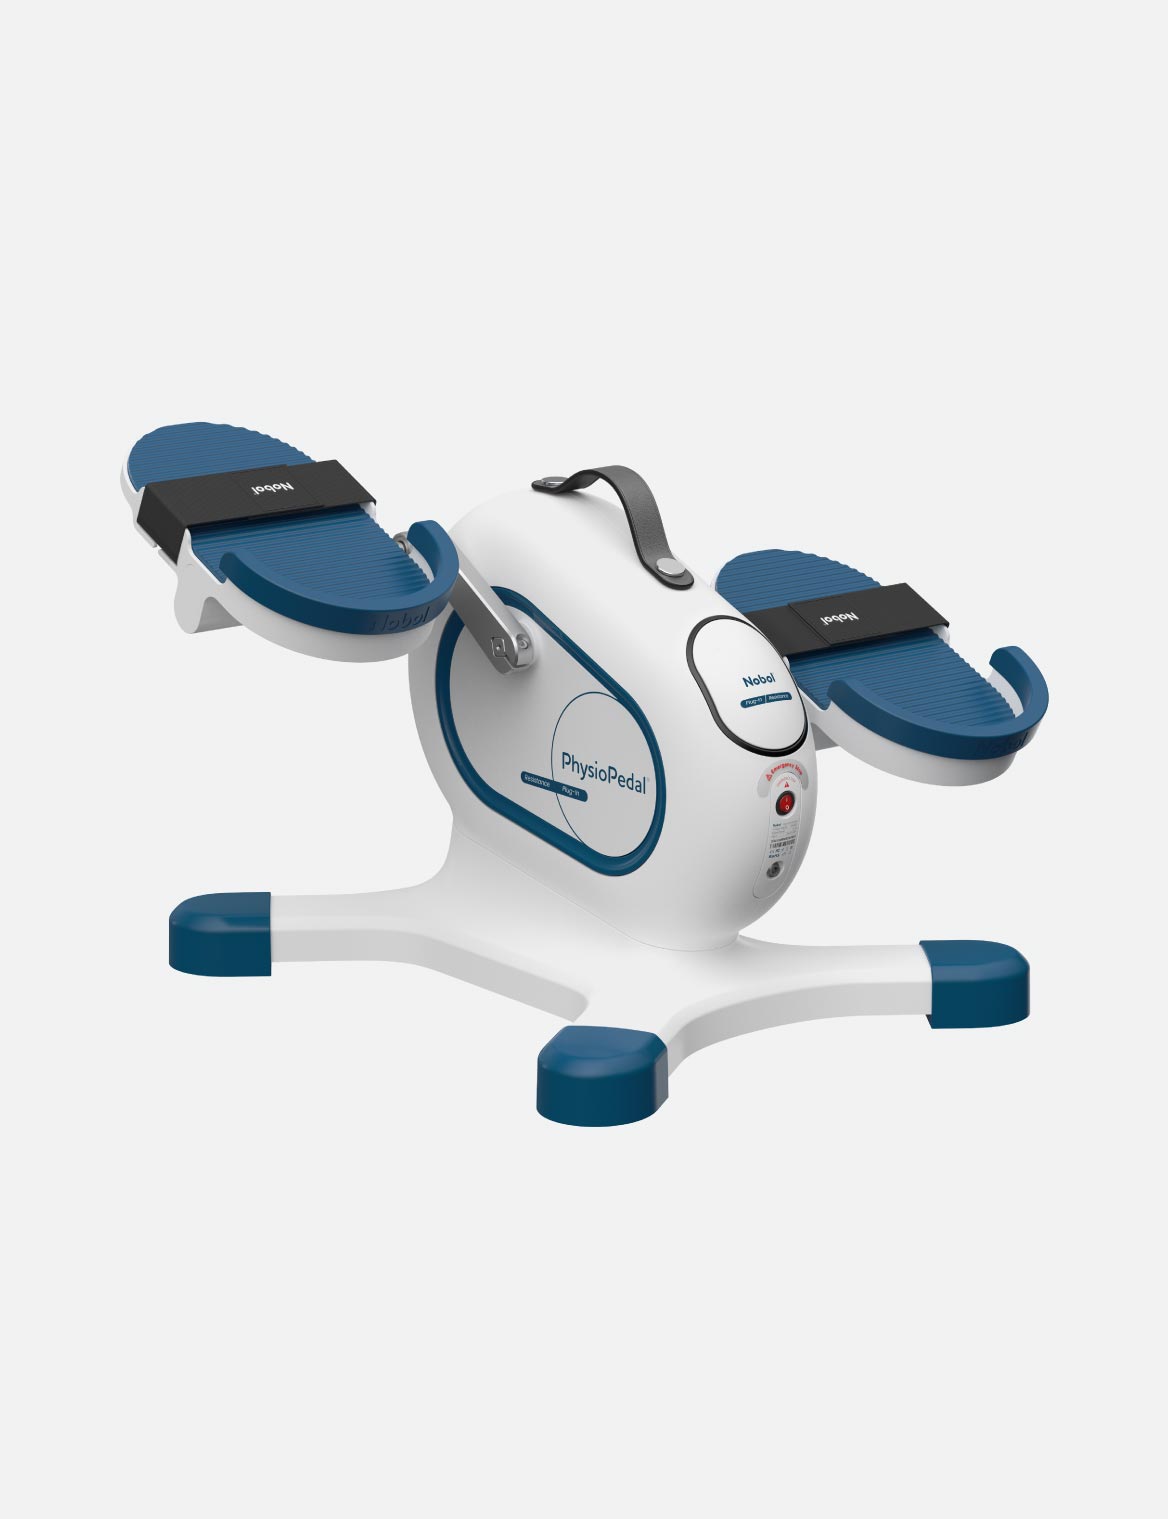 NEW PhysioPedal® Motorized Arm & Leg Exerciser with Resistance